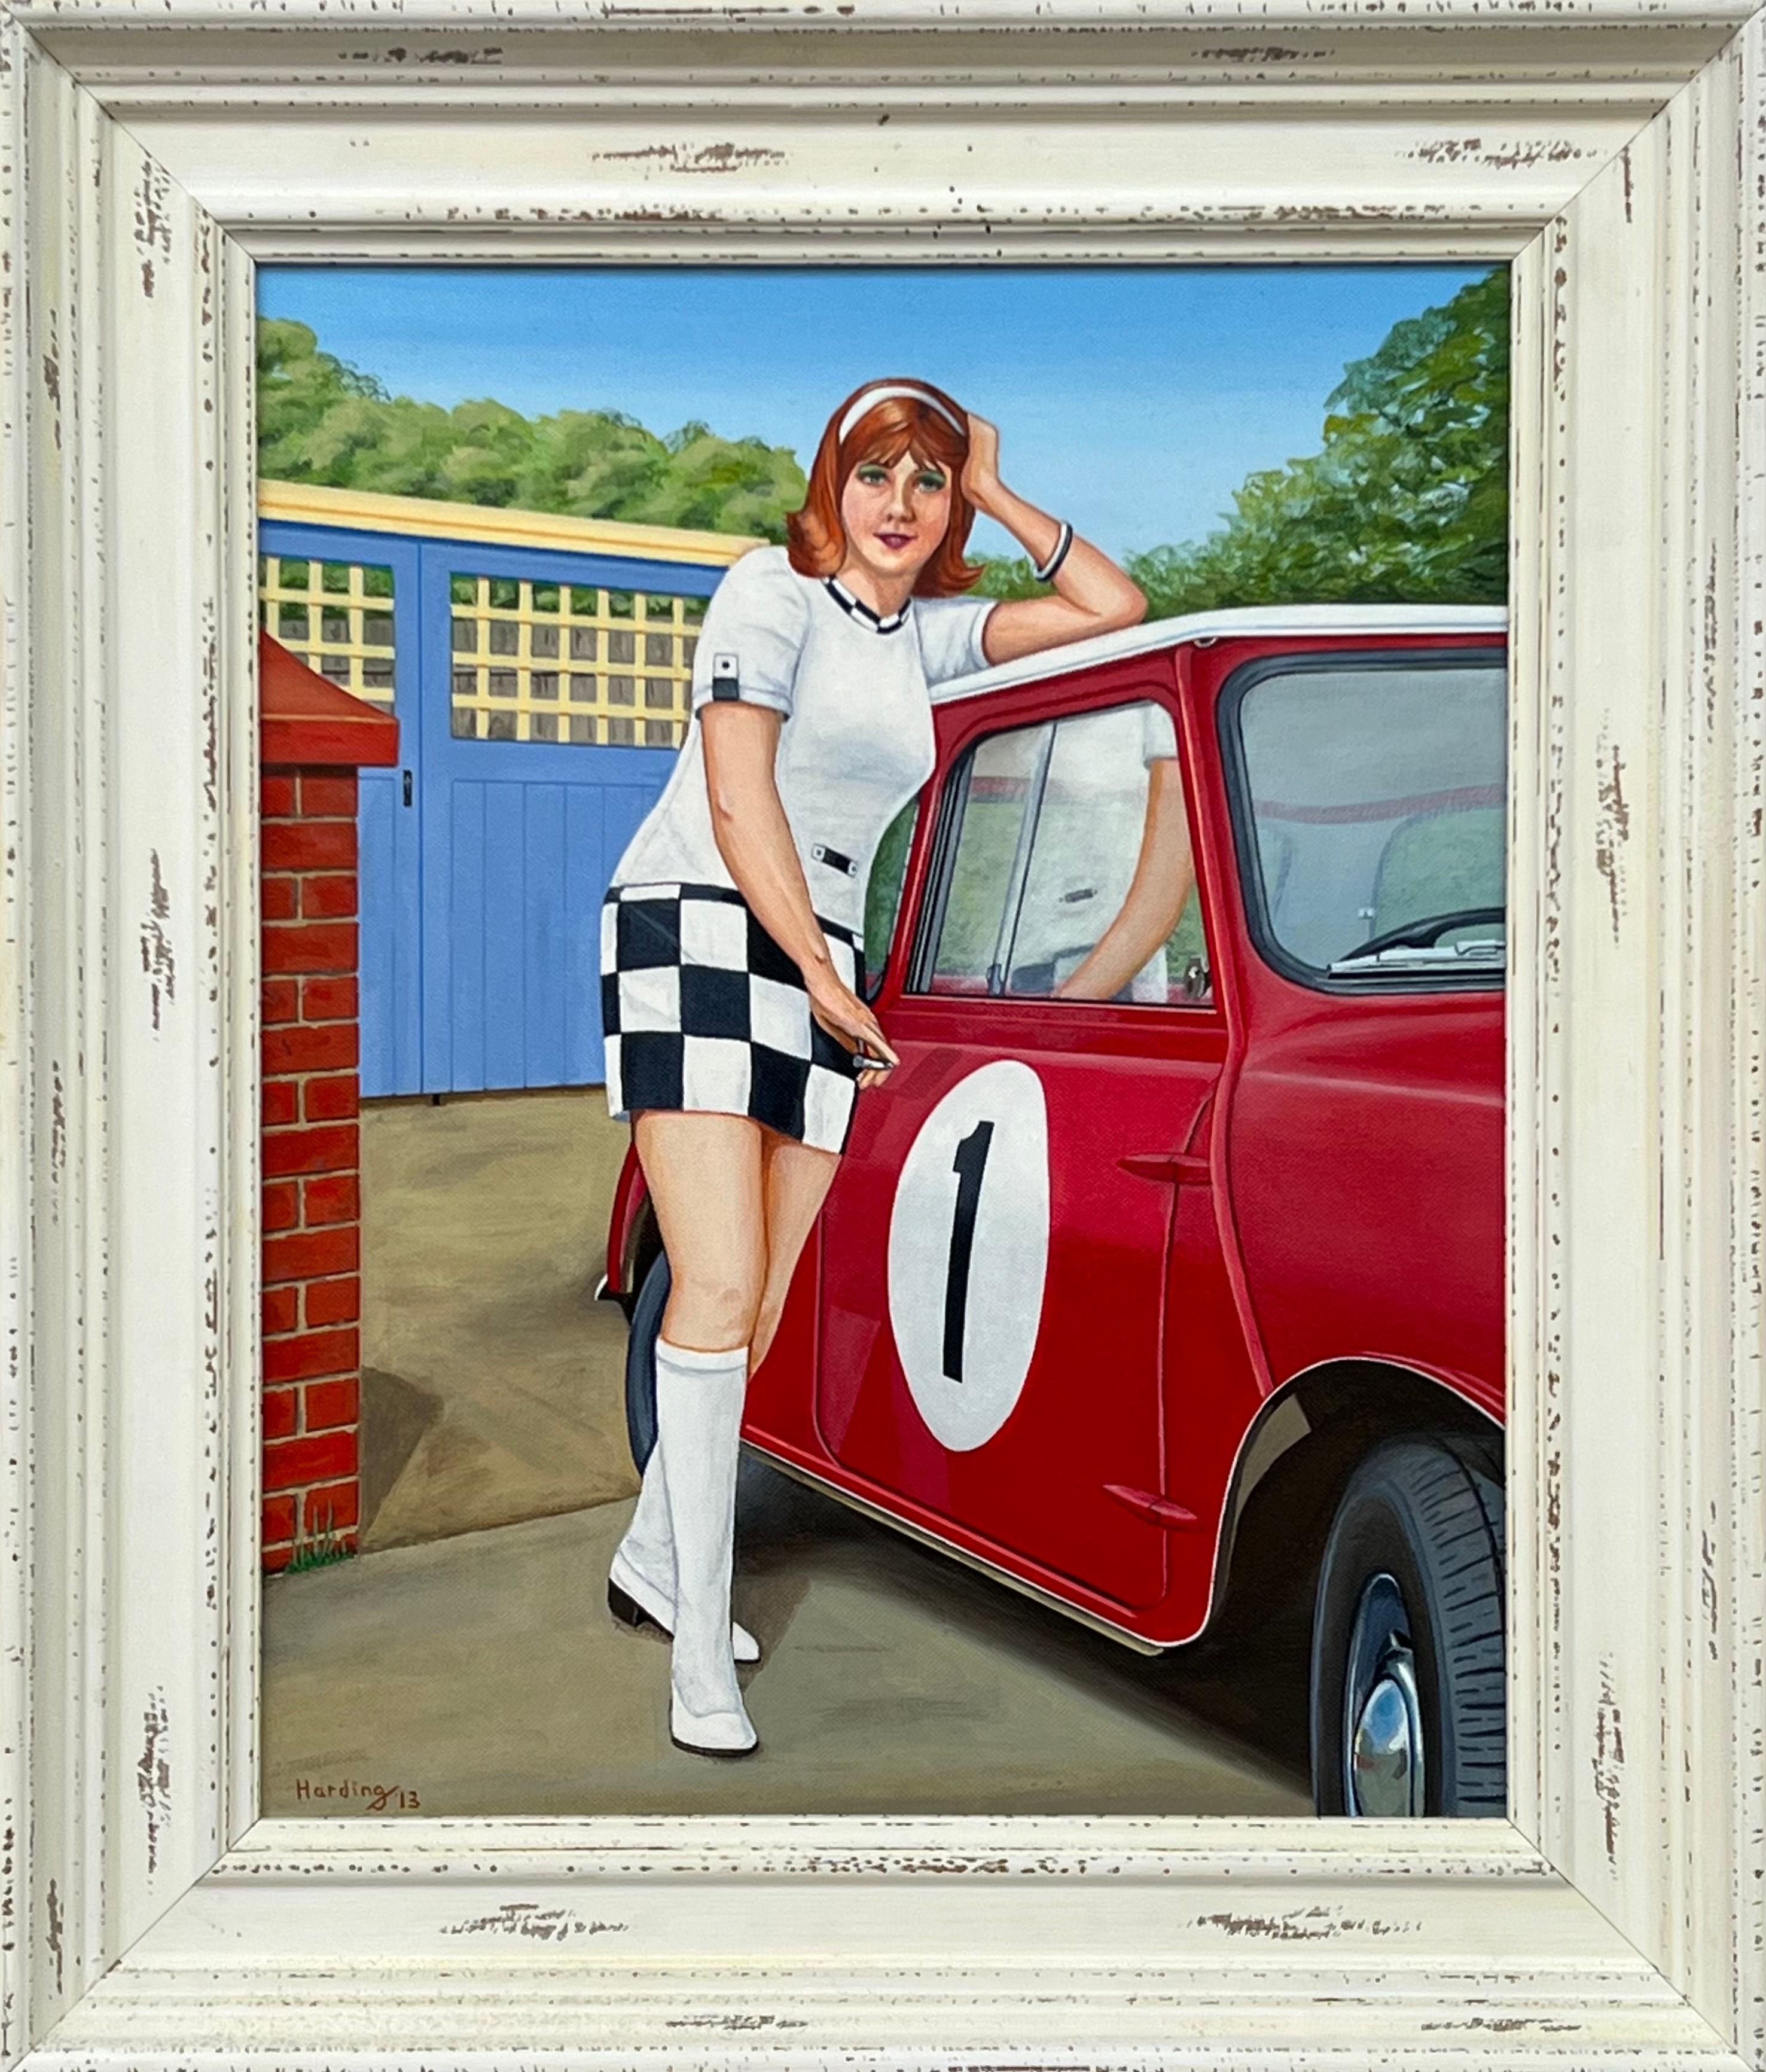 Paul F Harding Figurative Painting - 'A Racy Little Number’ a Woman with a Red Austin Mini Car in 1970's England